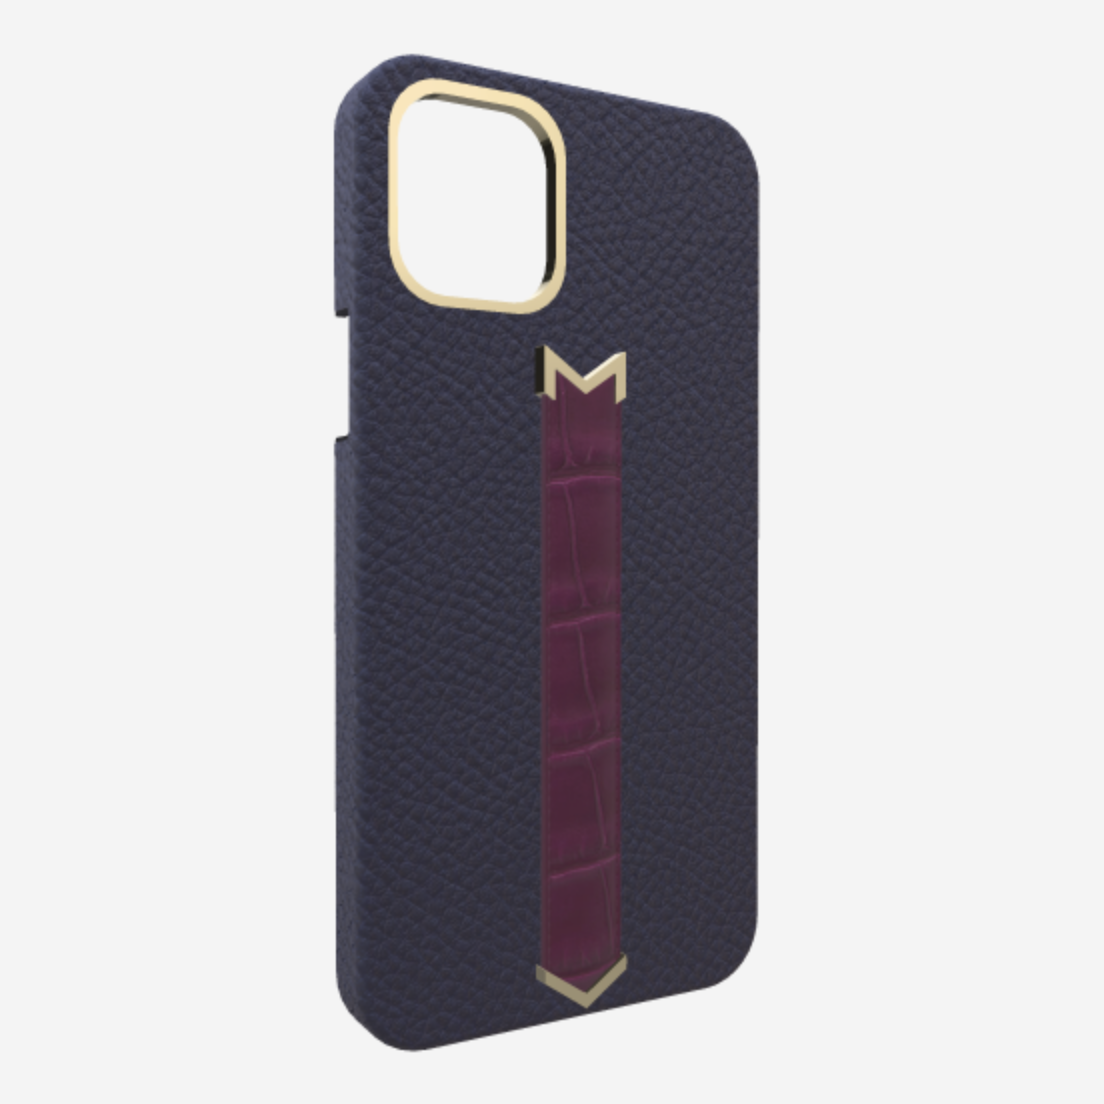 Gold Finger Strap Case for iPhone 13 Pro in Genuine Calfskin and Alligator Navy Blue Boysenberry Island 